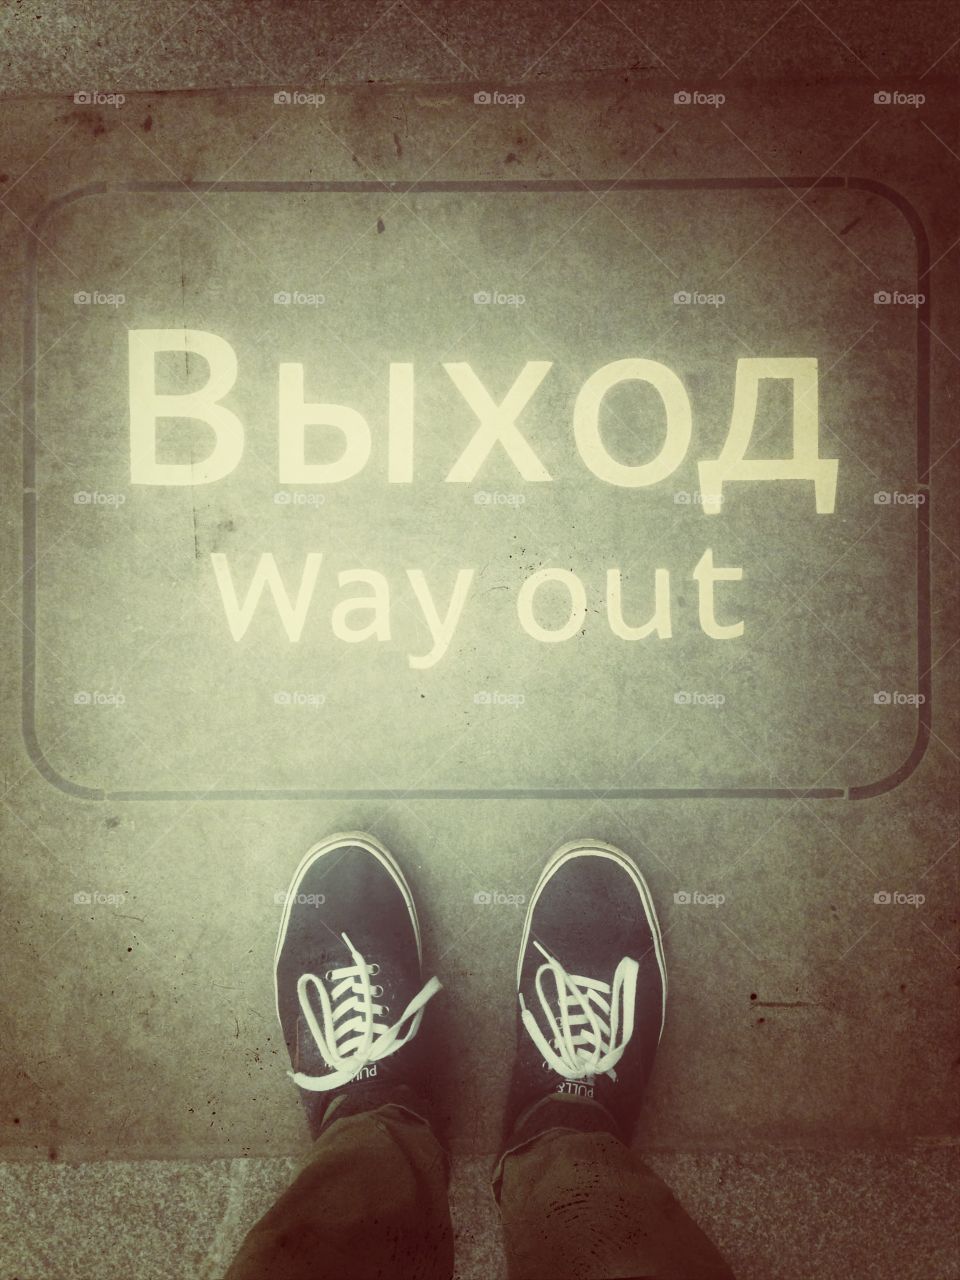 Blue shoes near the white way out выход sign